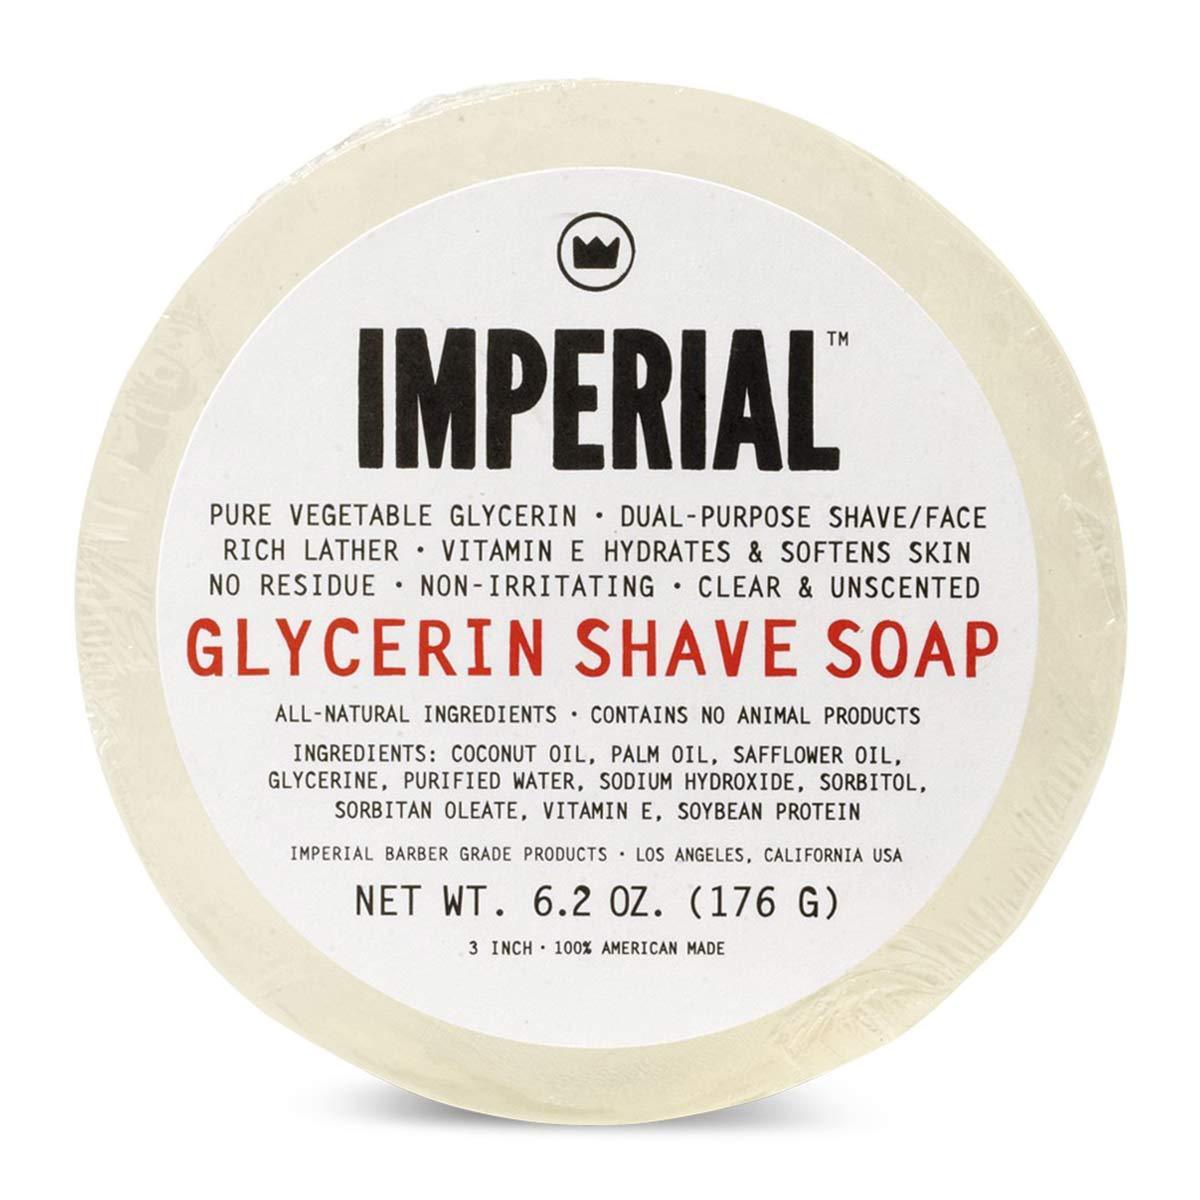 Imperial - Glycerin Shave Soap